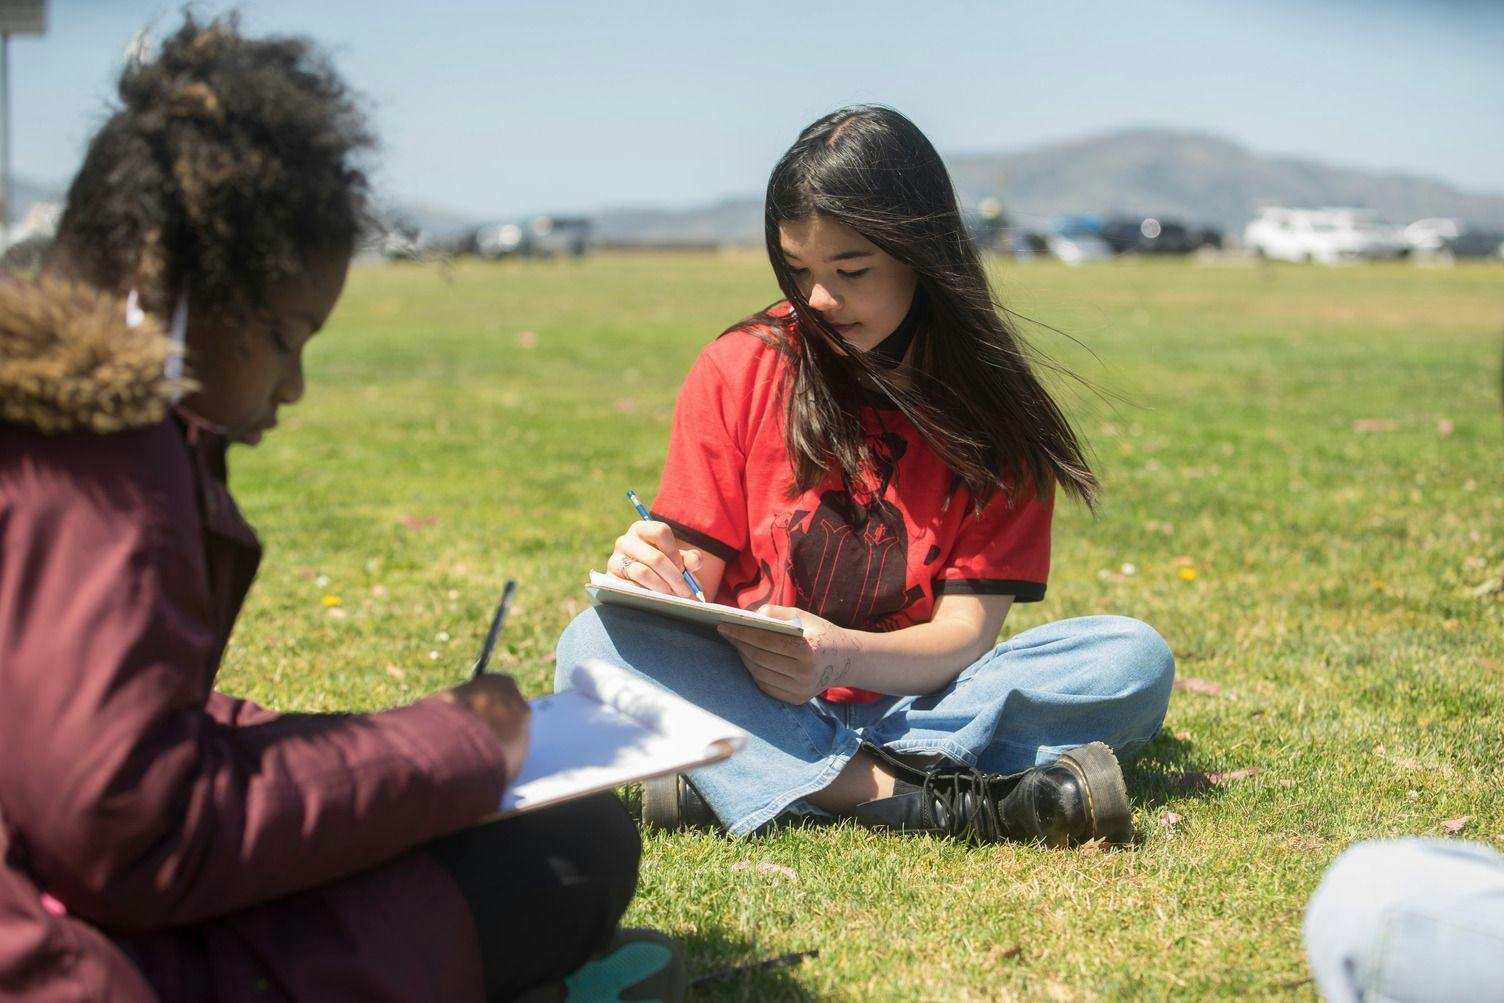 ATI Fort Mason student sitting on grass writing in a notebook